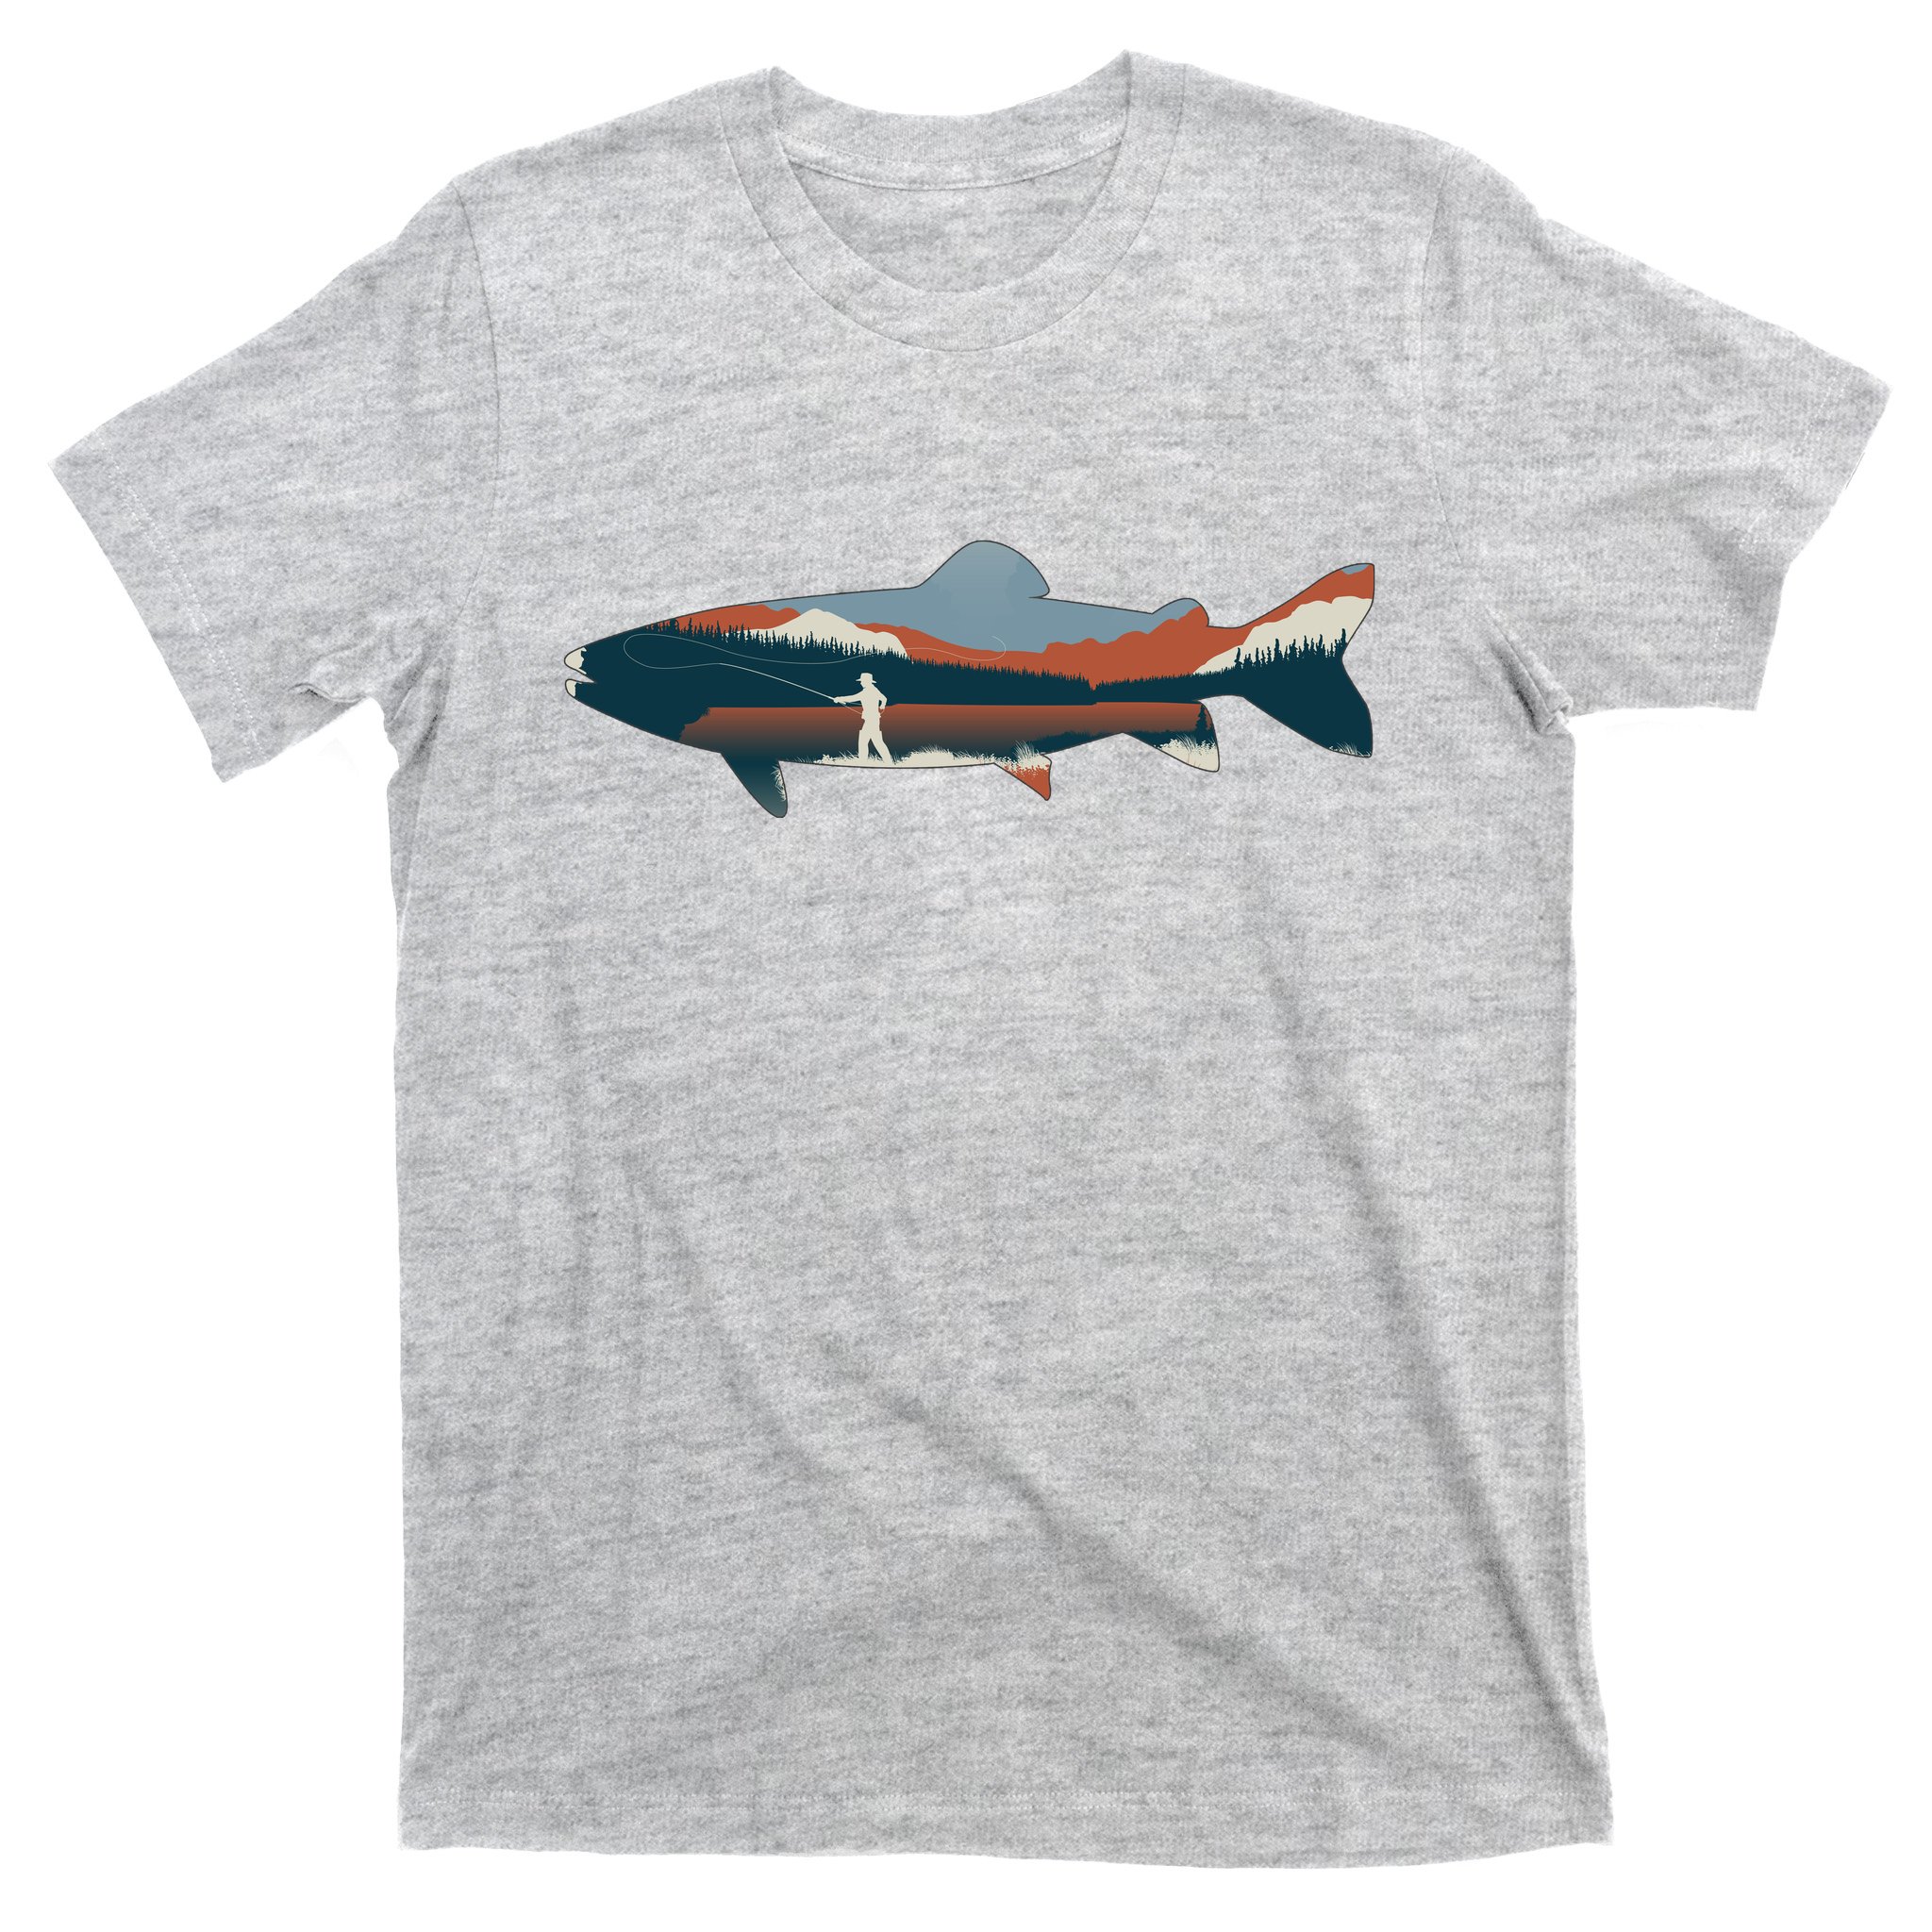 Wade for It Fly Fishing Silhouette Shirt Graphic by Craft Quest